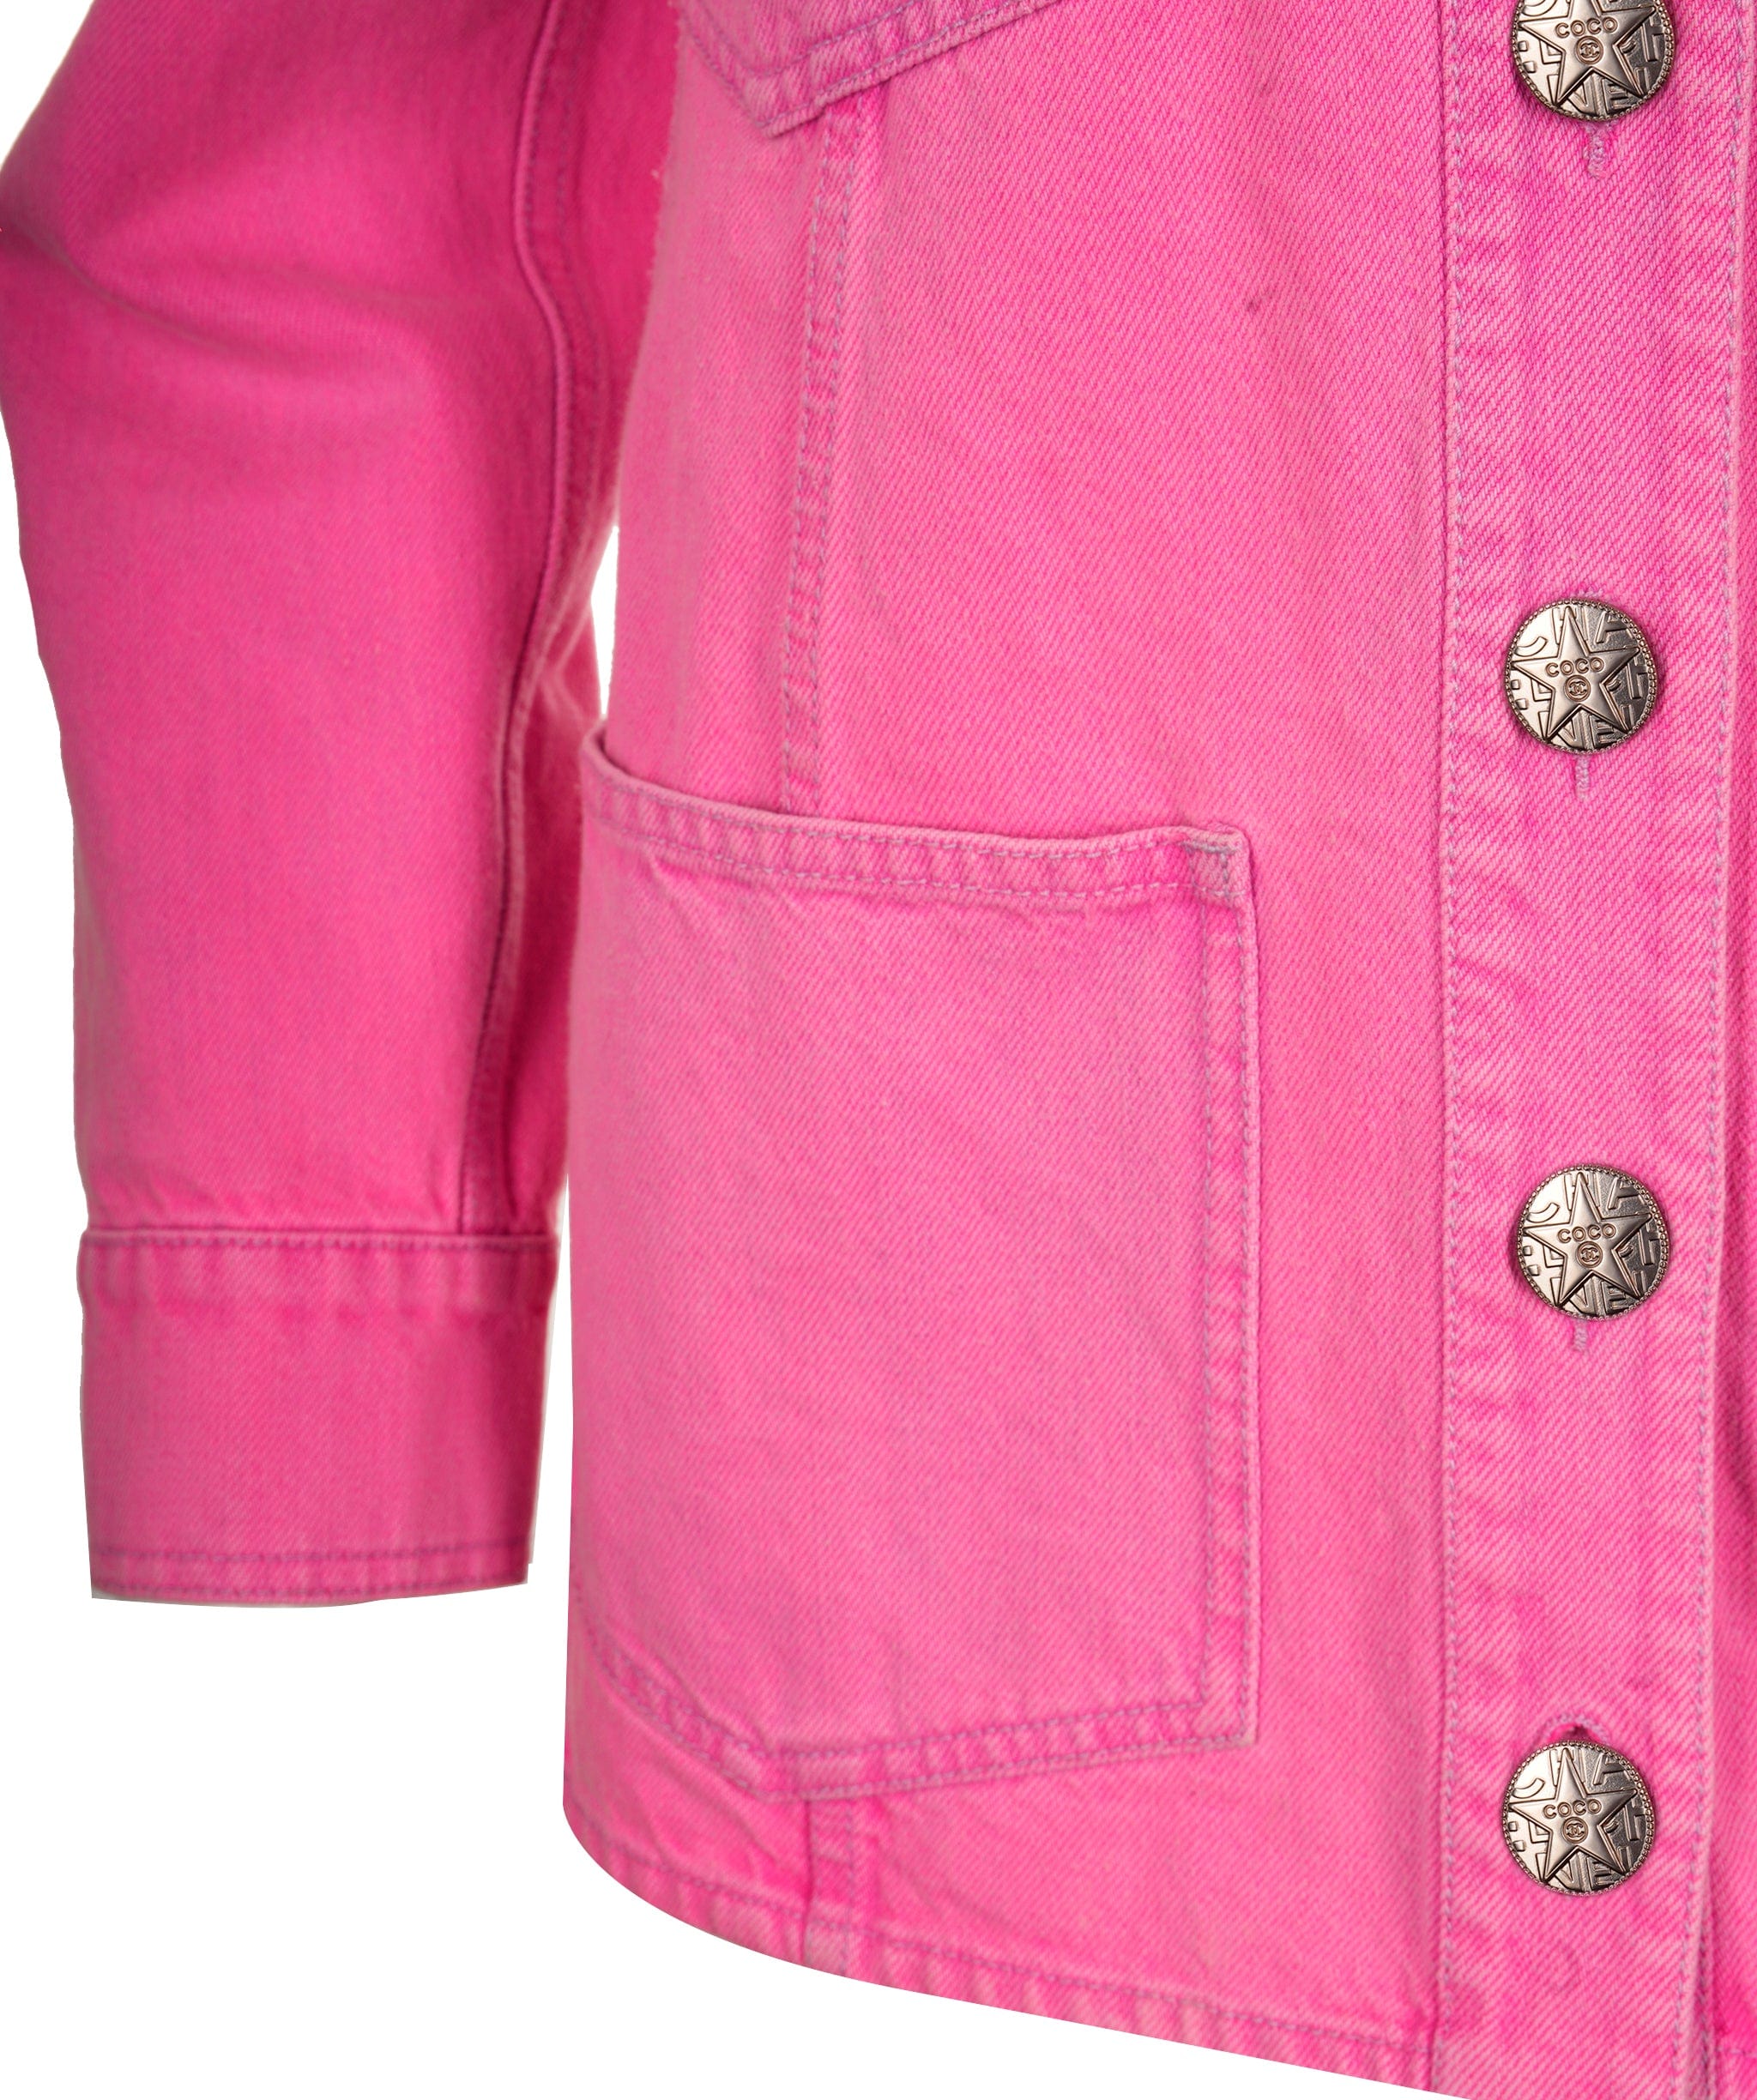 Chanel Chanel Jacket long denim neon pink with camelias 21S FR36 P70707V62121 AVC1709